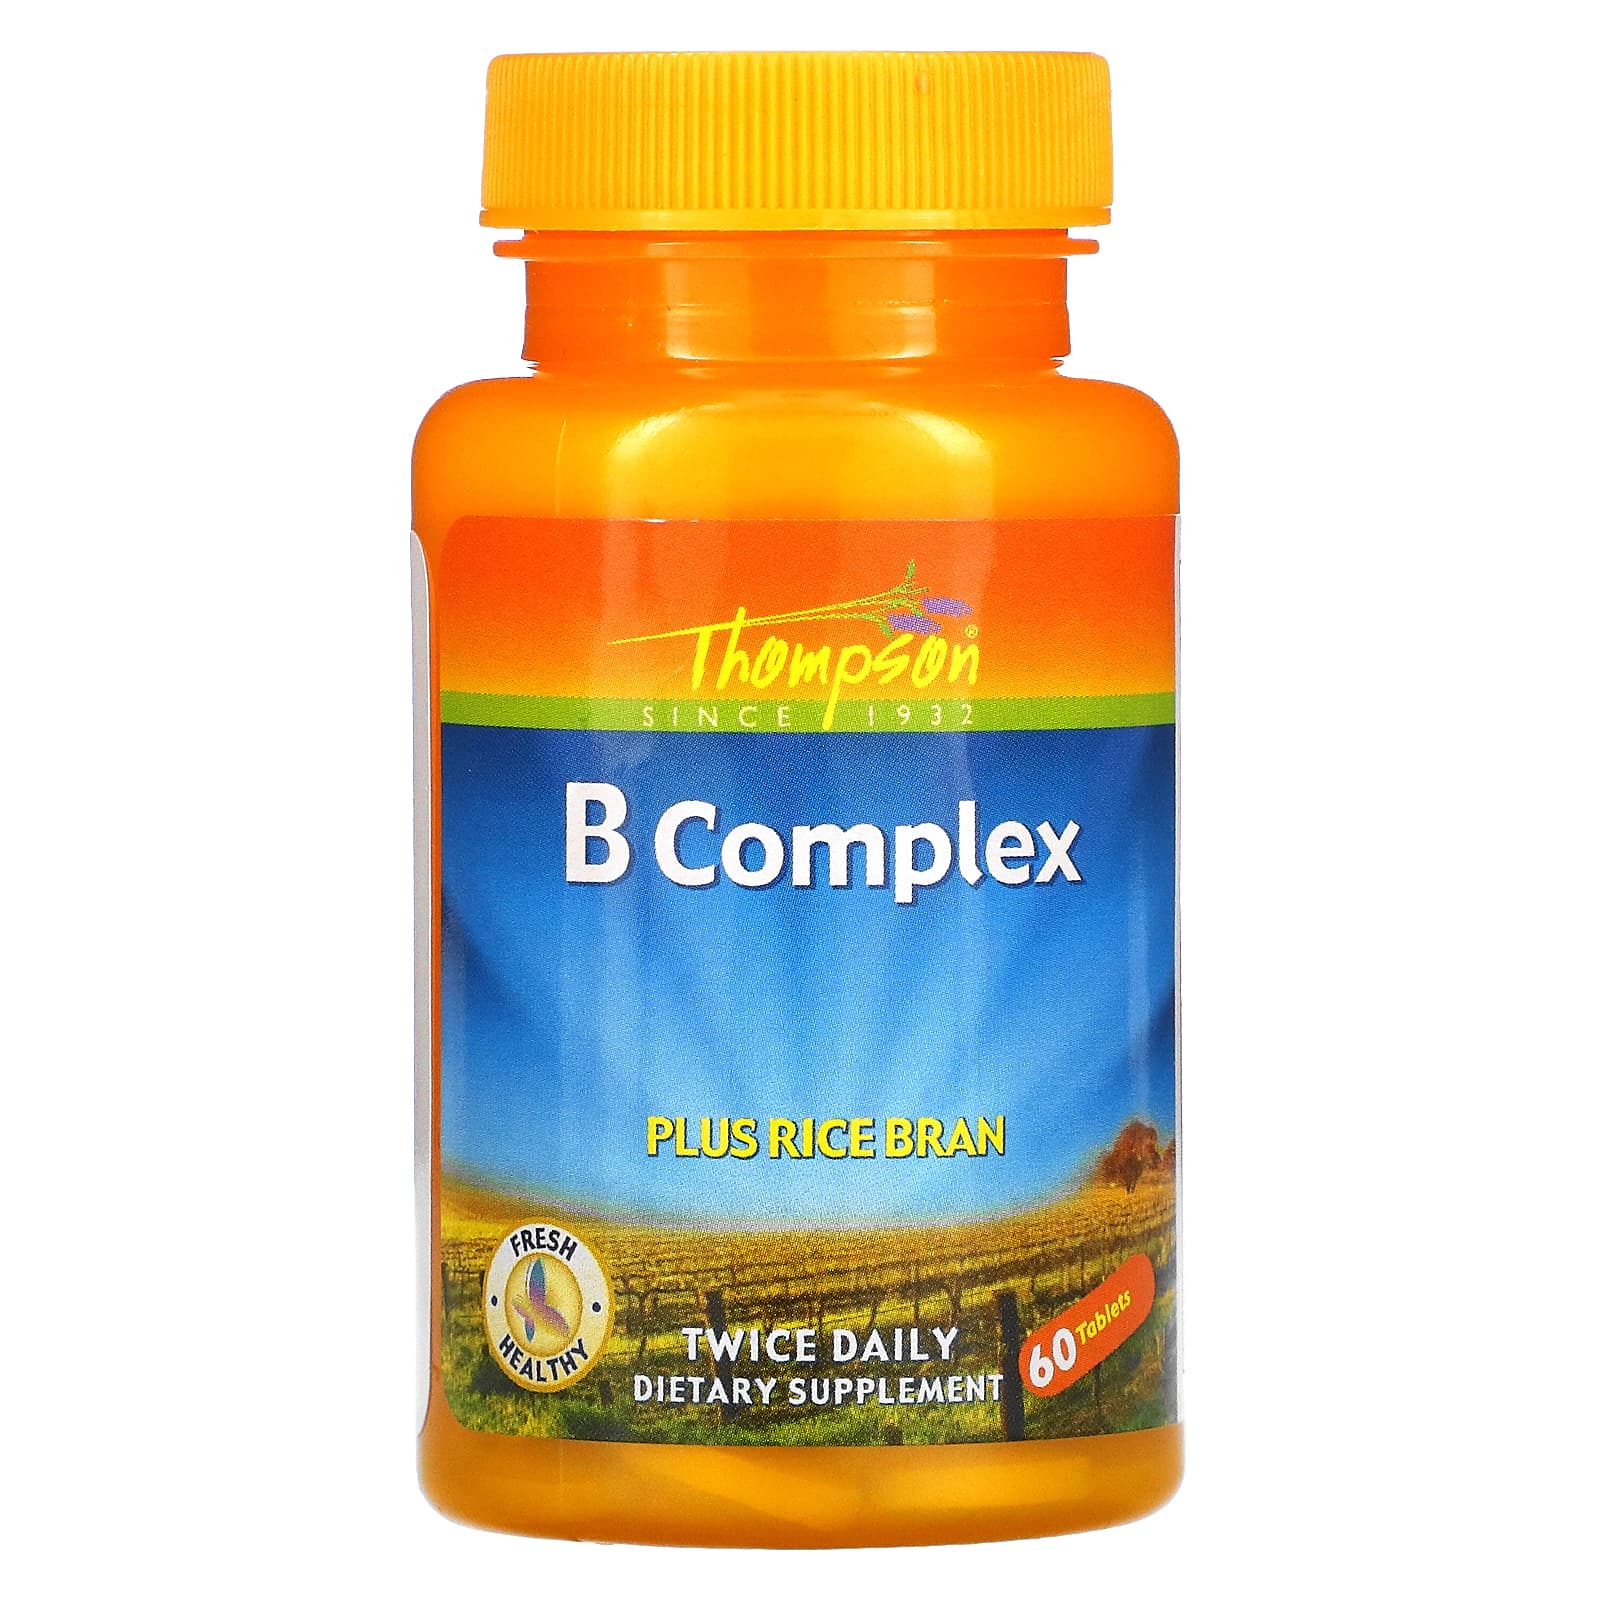 Thompson B Complex, Plus Rice Bran, 60 Tablets, From Nutritional